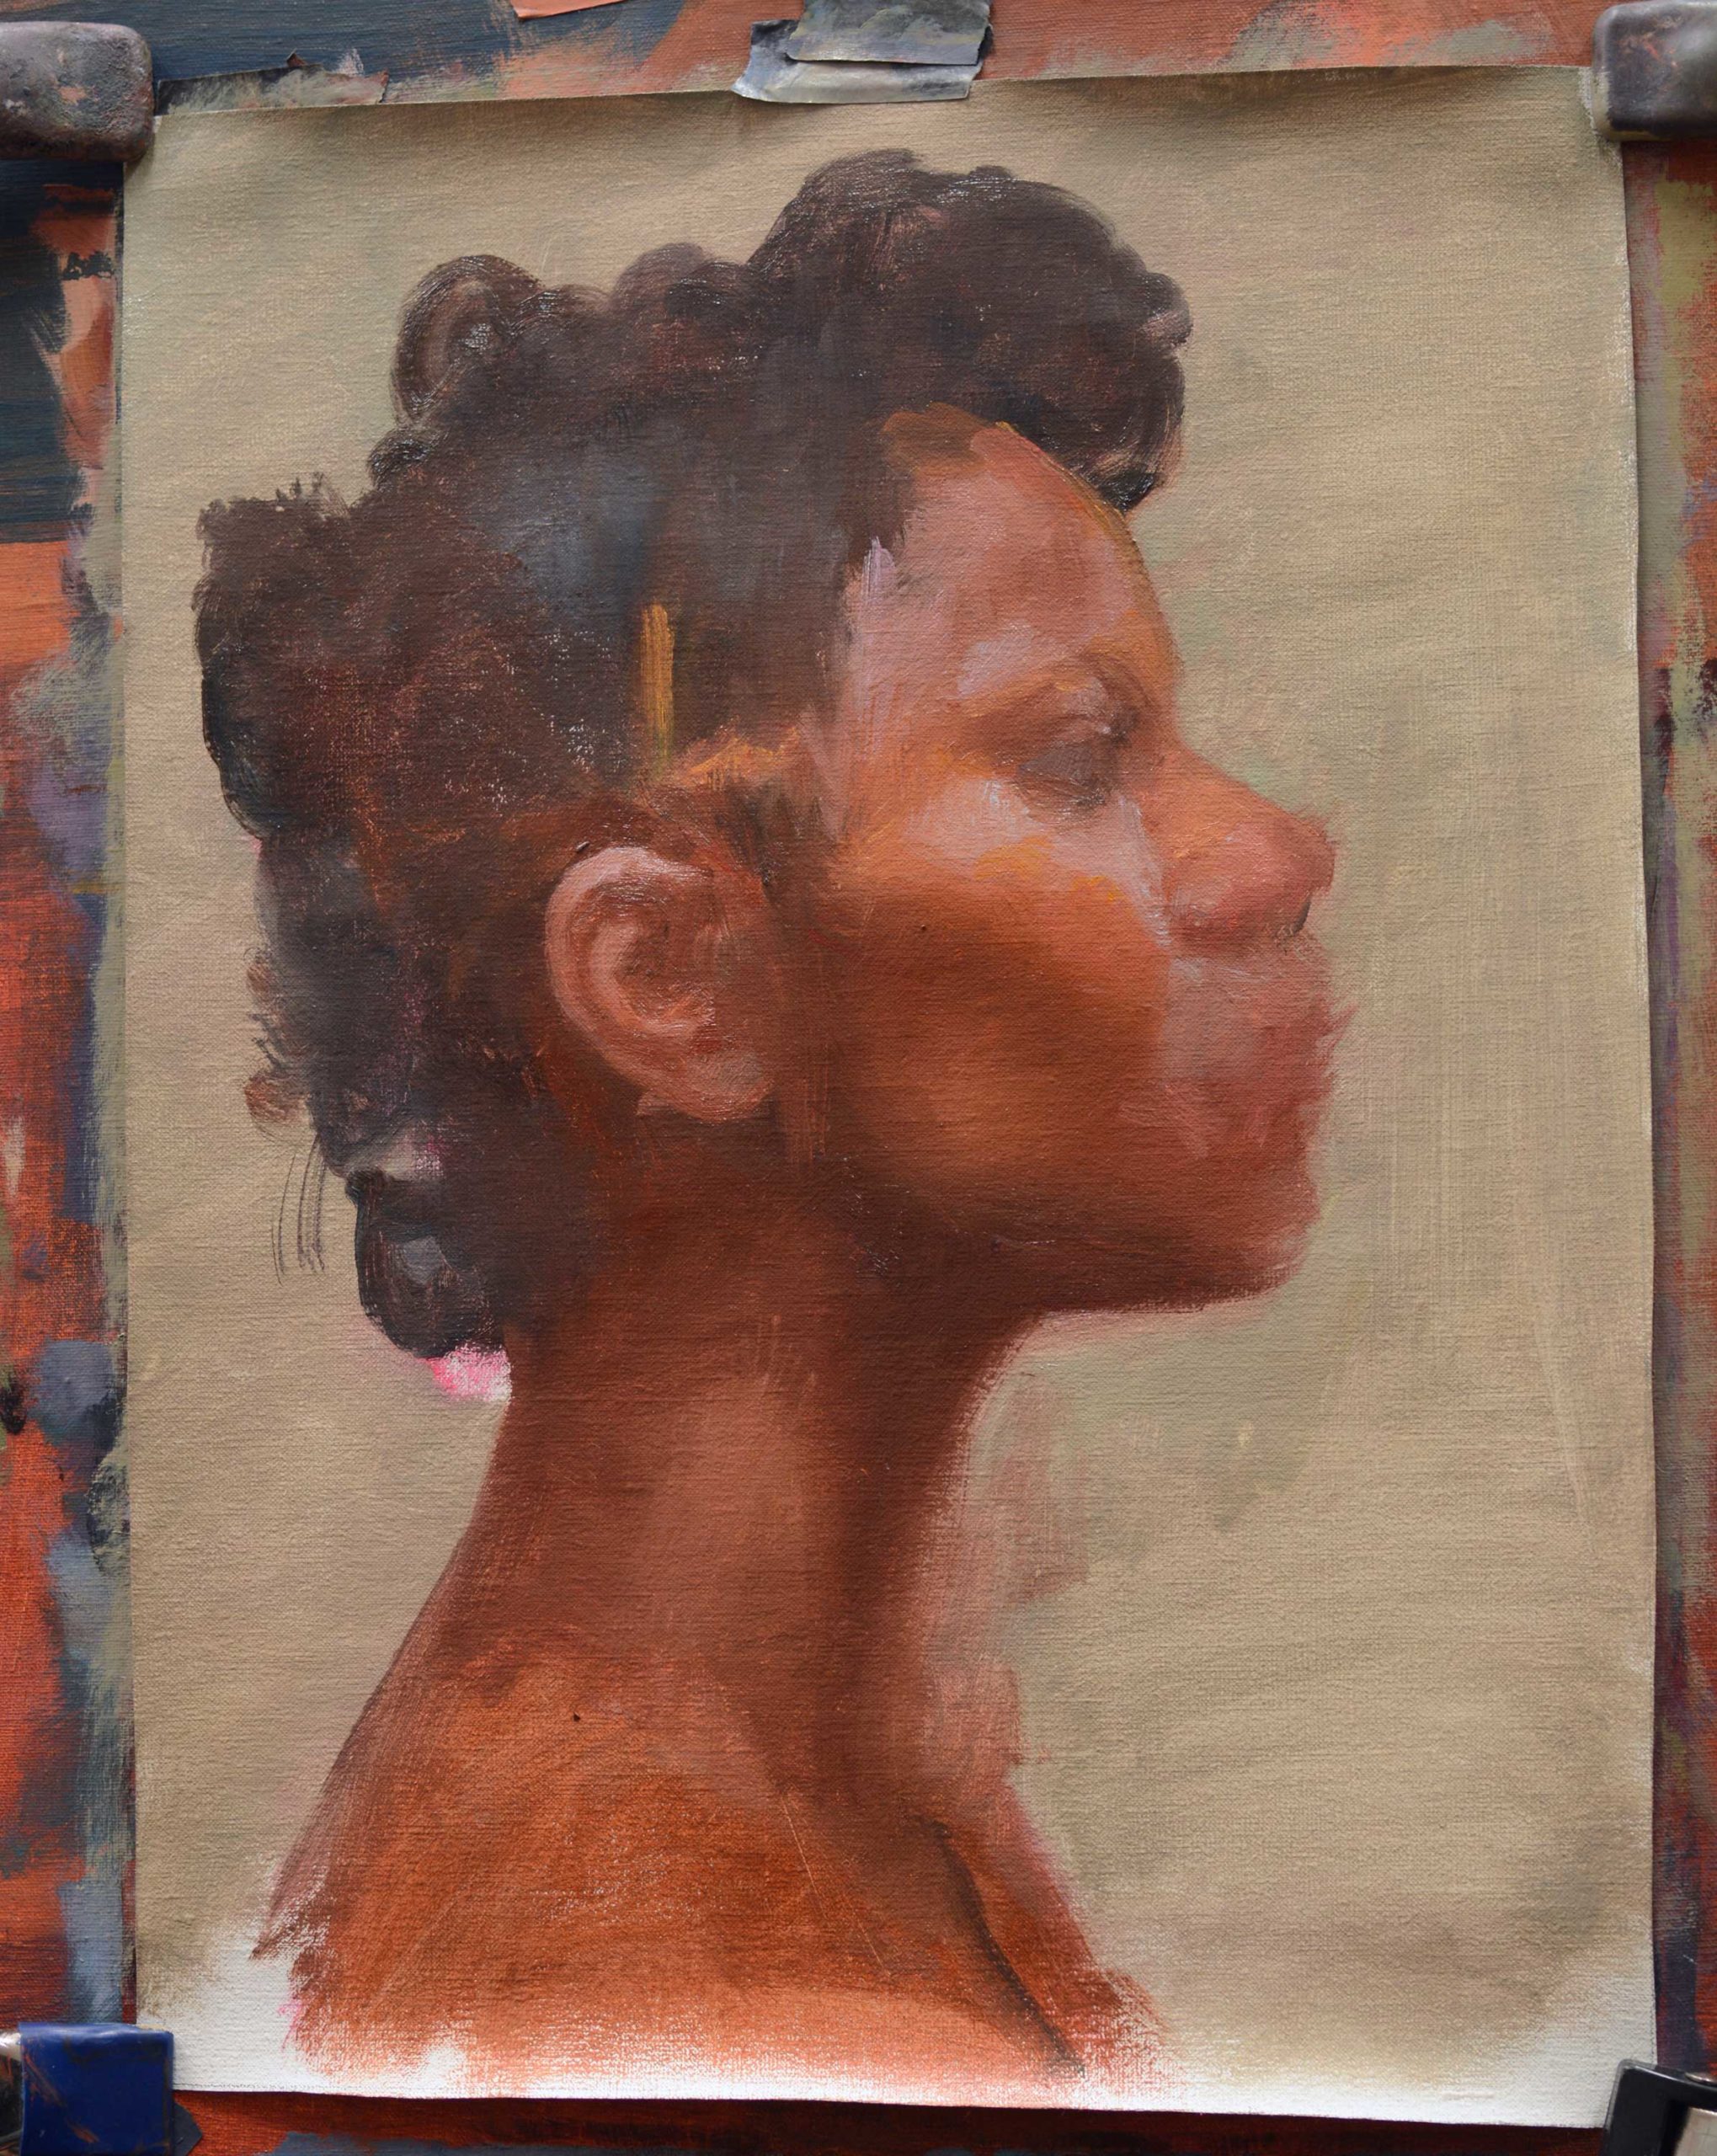 oil painted portrait of head in profile with colors being applied more carefully to give form